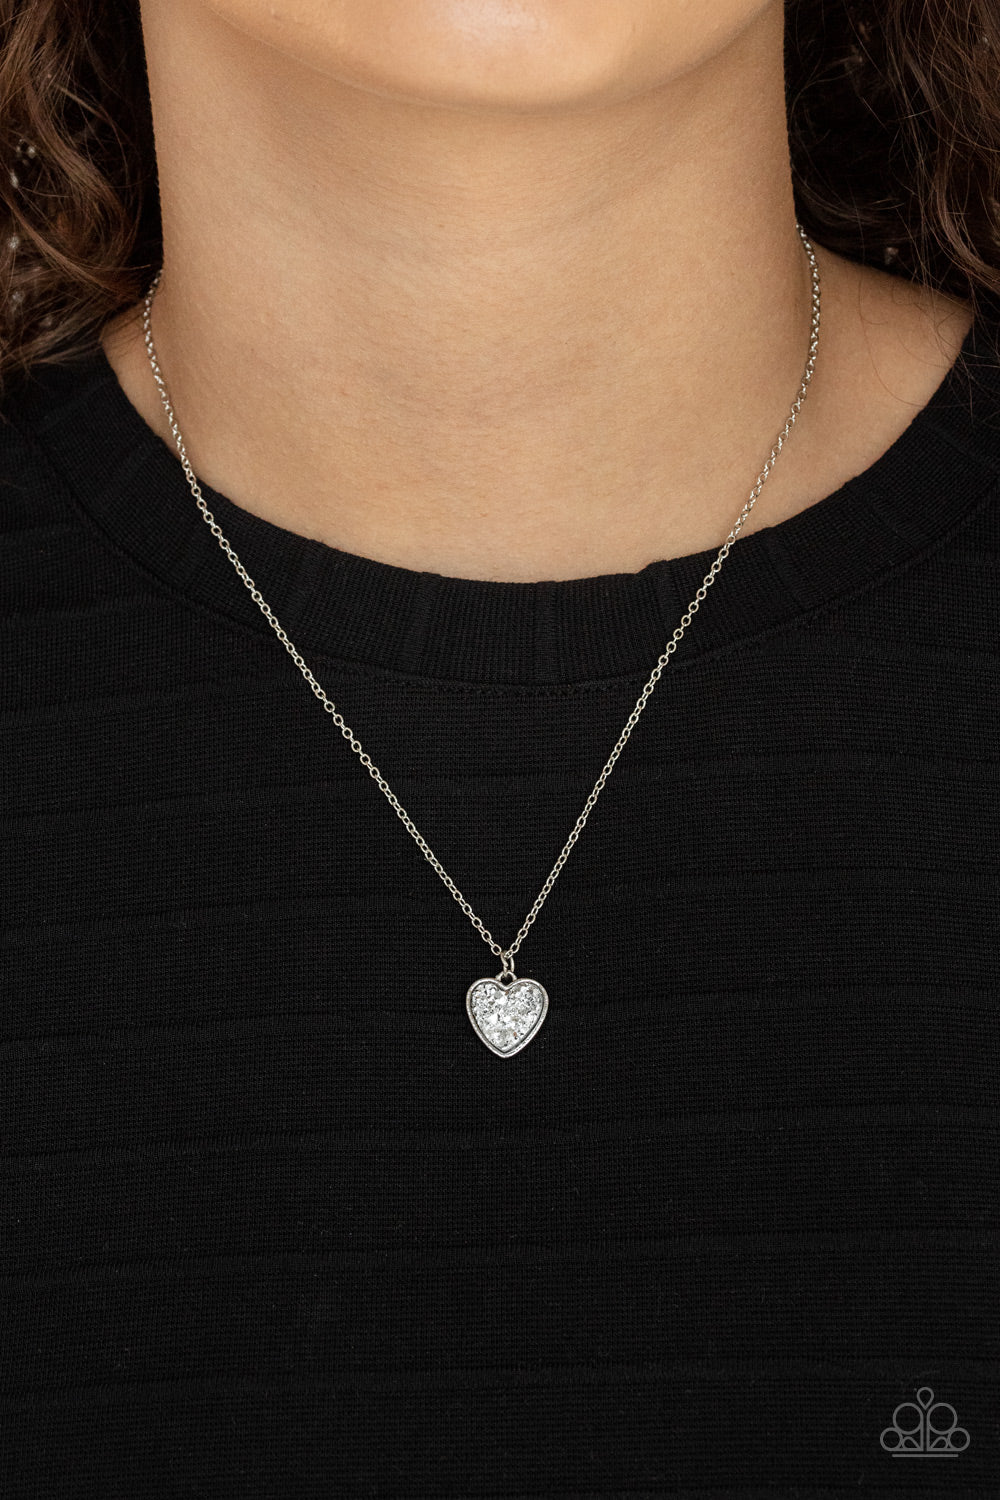 Paparazzi Necklaces - Pitter-Patter, Goes My Heart - Silver